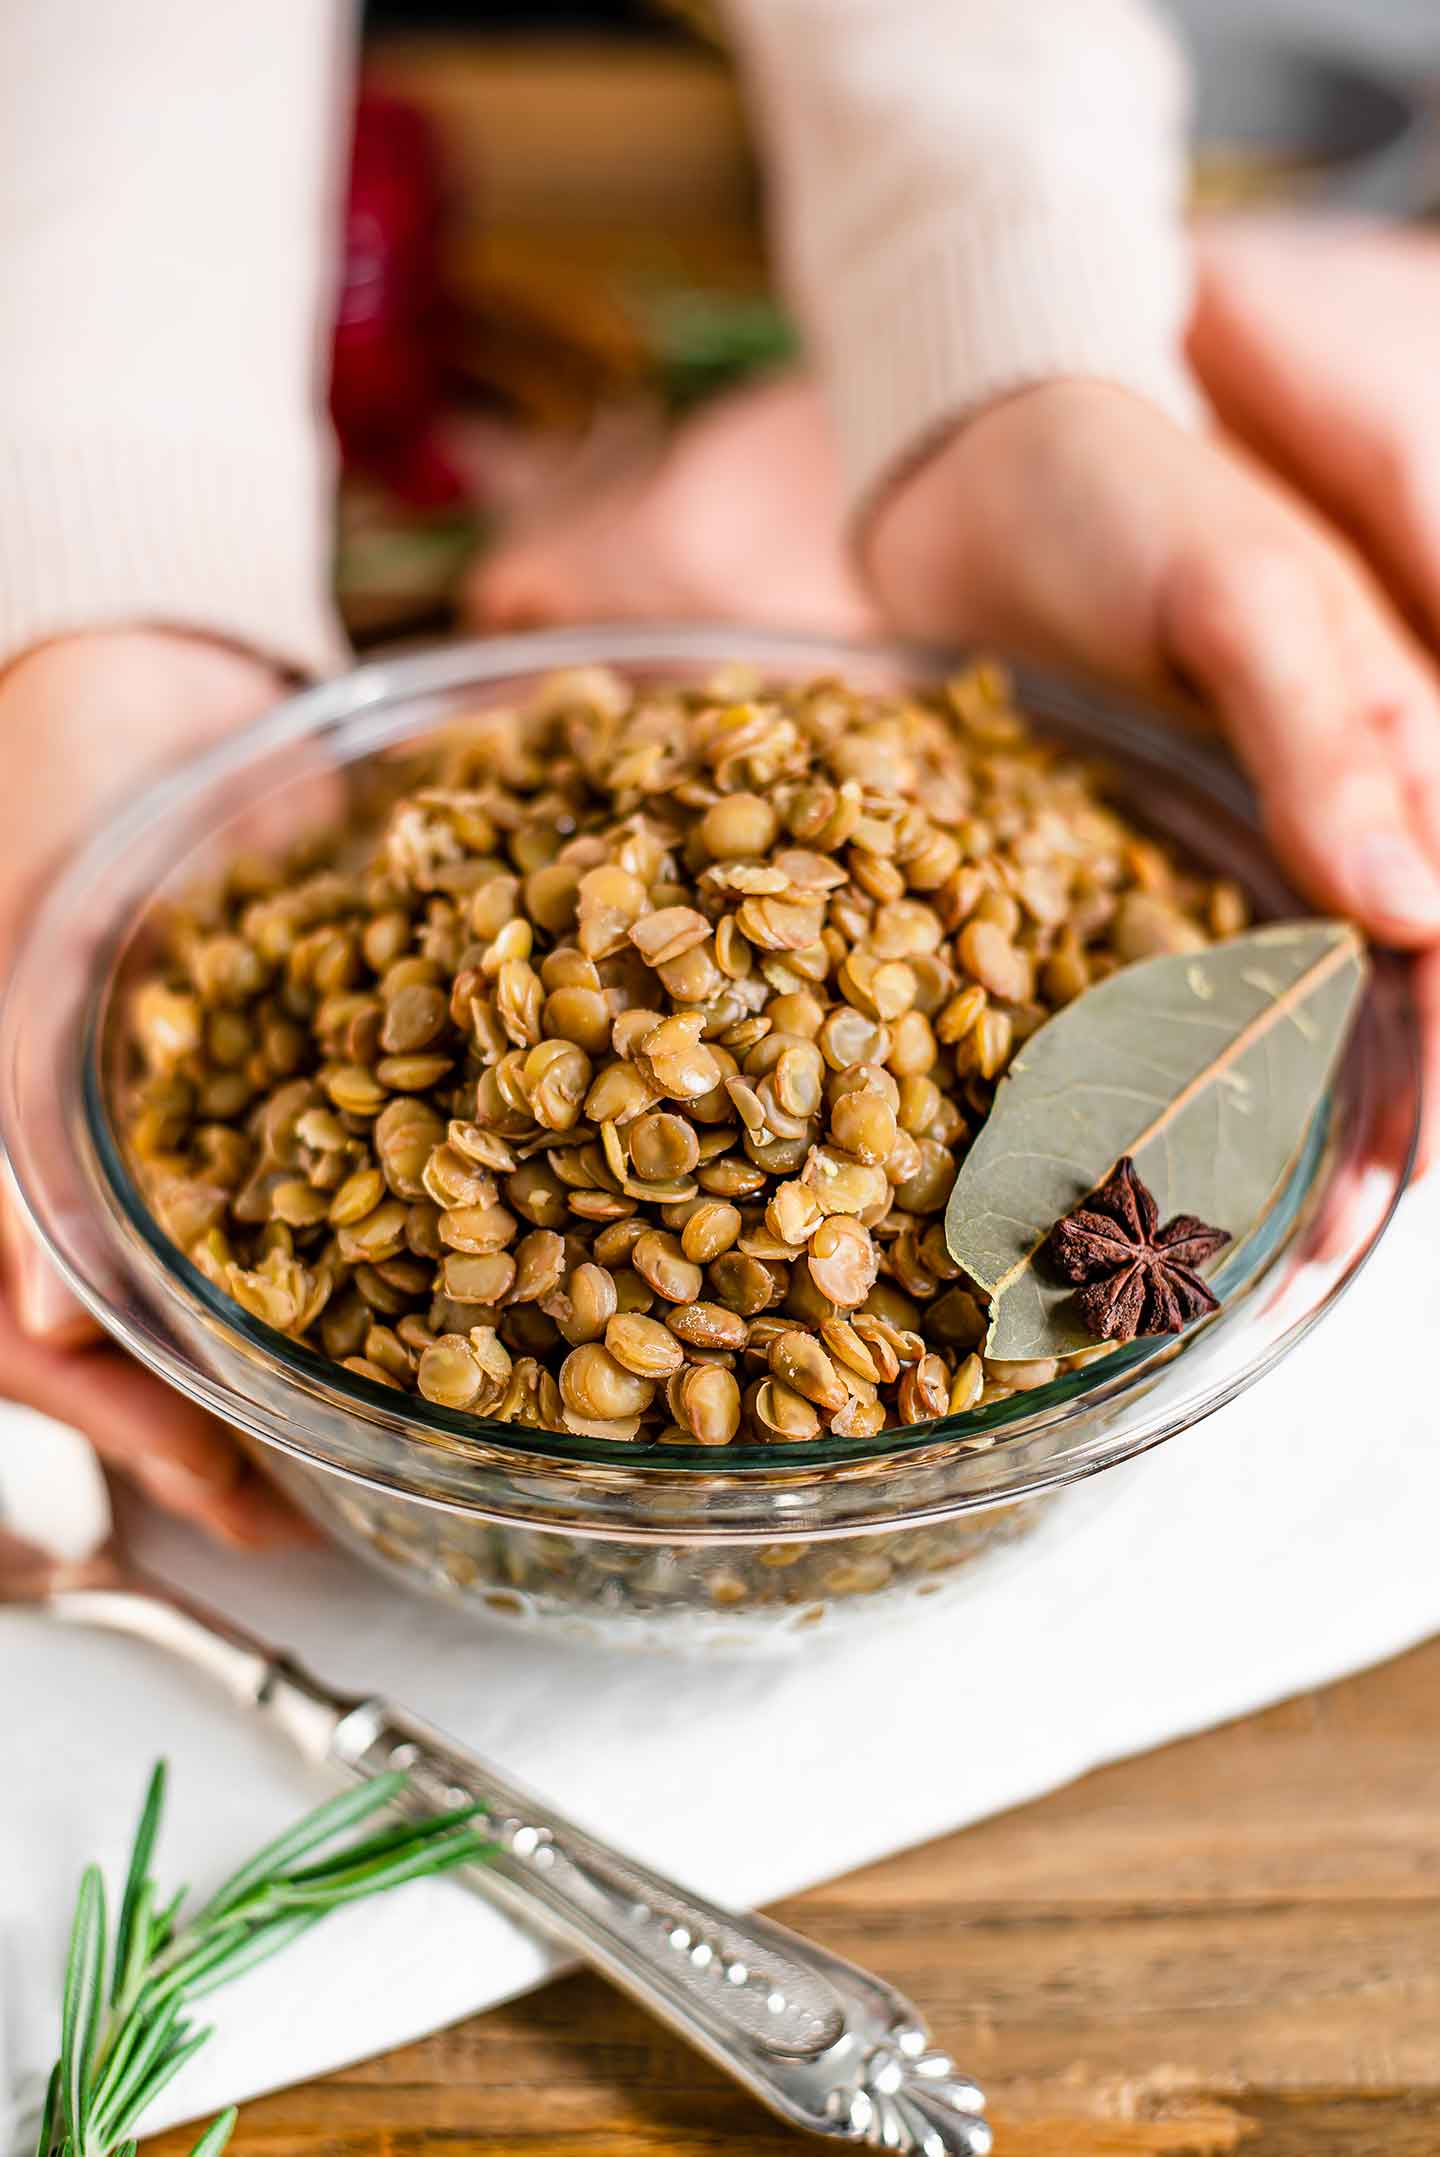 Side view of hands placing a bowl of cooked green lentils on a white tray. The lentils are garnished with a bay leaf and star anise. 